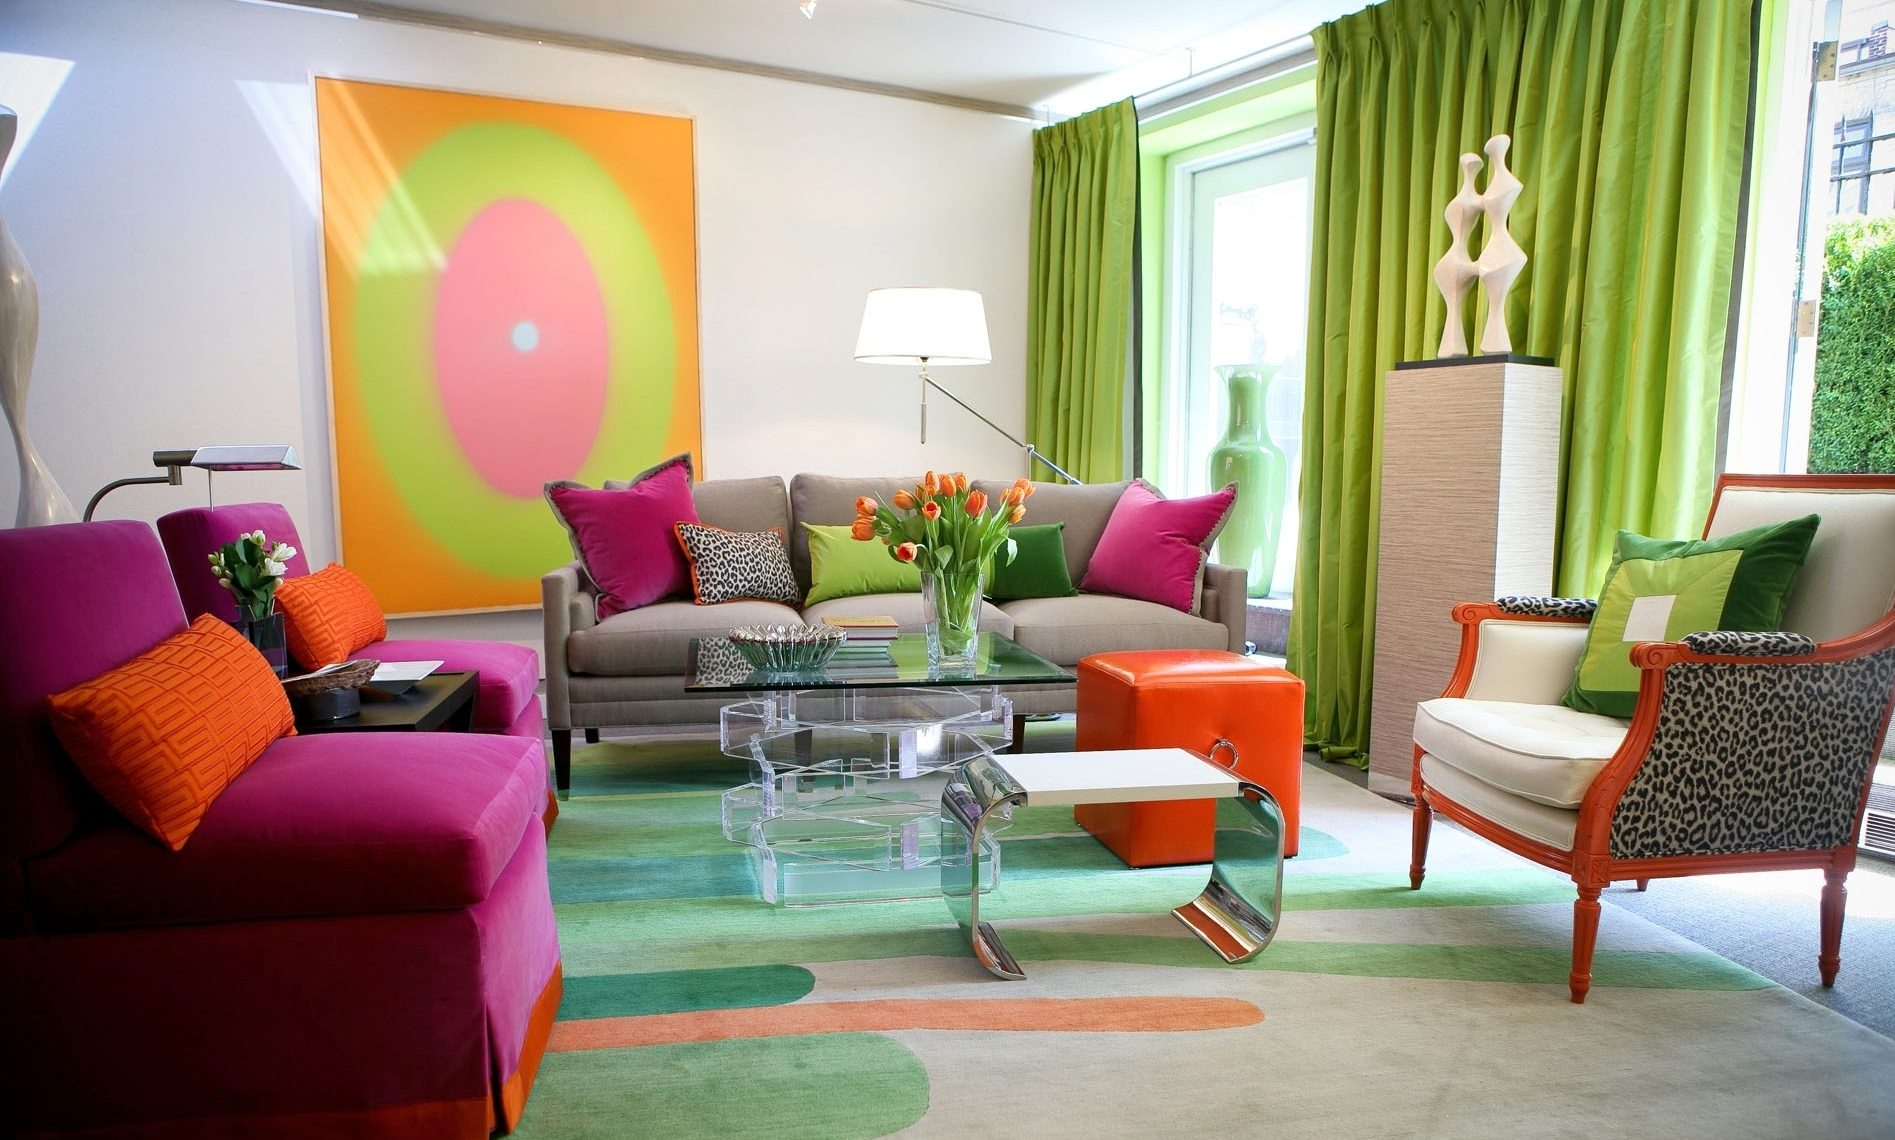 Bright colors in the decor of the living room